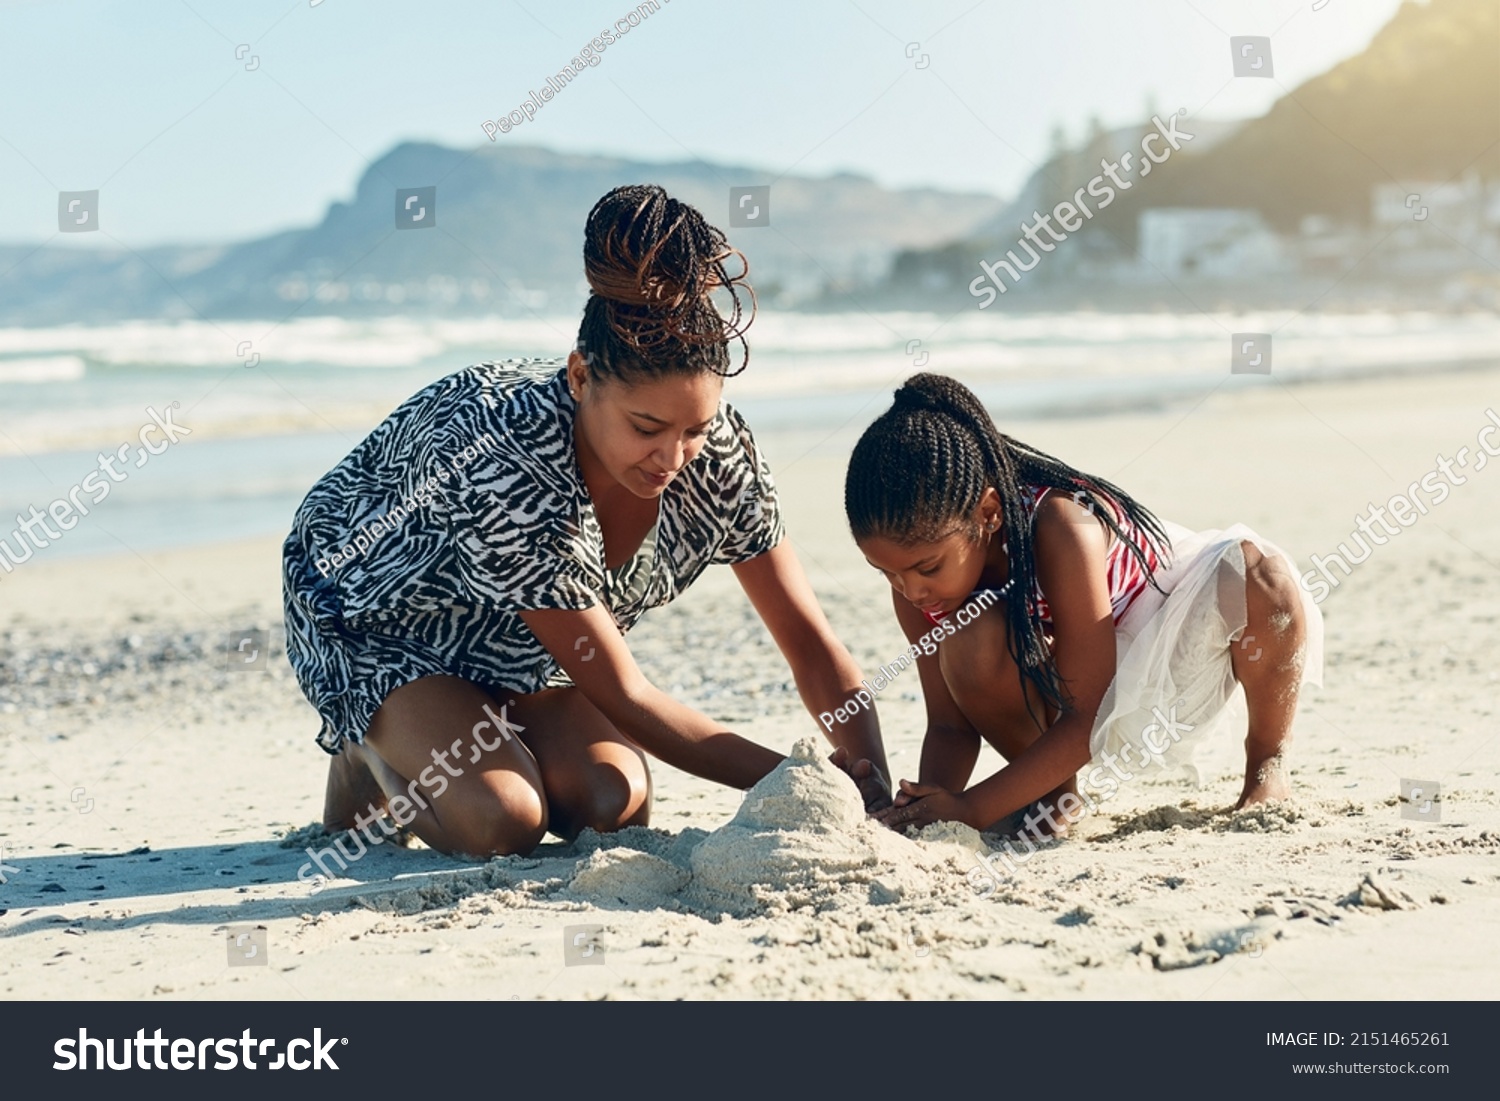 Its their favourite beach activity. Shot of a mother and her little daughter building a sandcastle together at the beach. #2151465261